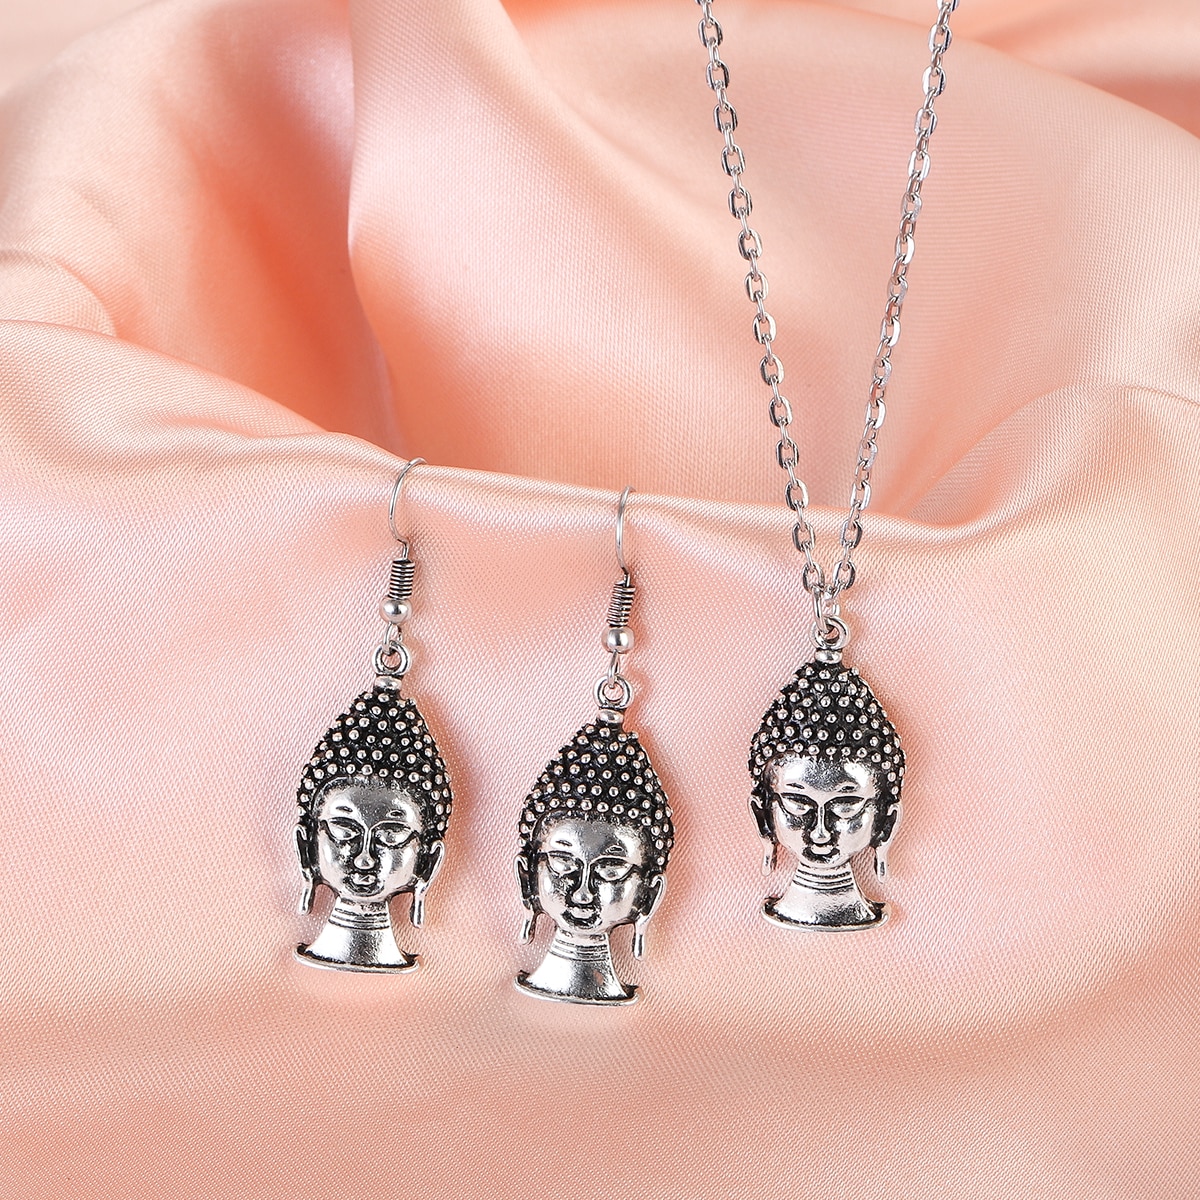 Vintage-Ethnic-Silver-Color-Buddha-Necklace-Set-Women-Alloy-Carved-Buddha-Lucky-Amulet-Jewelry-Sets--1005004970504388-9